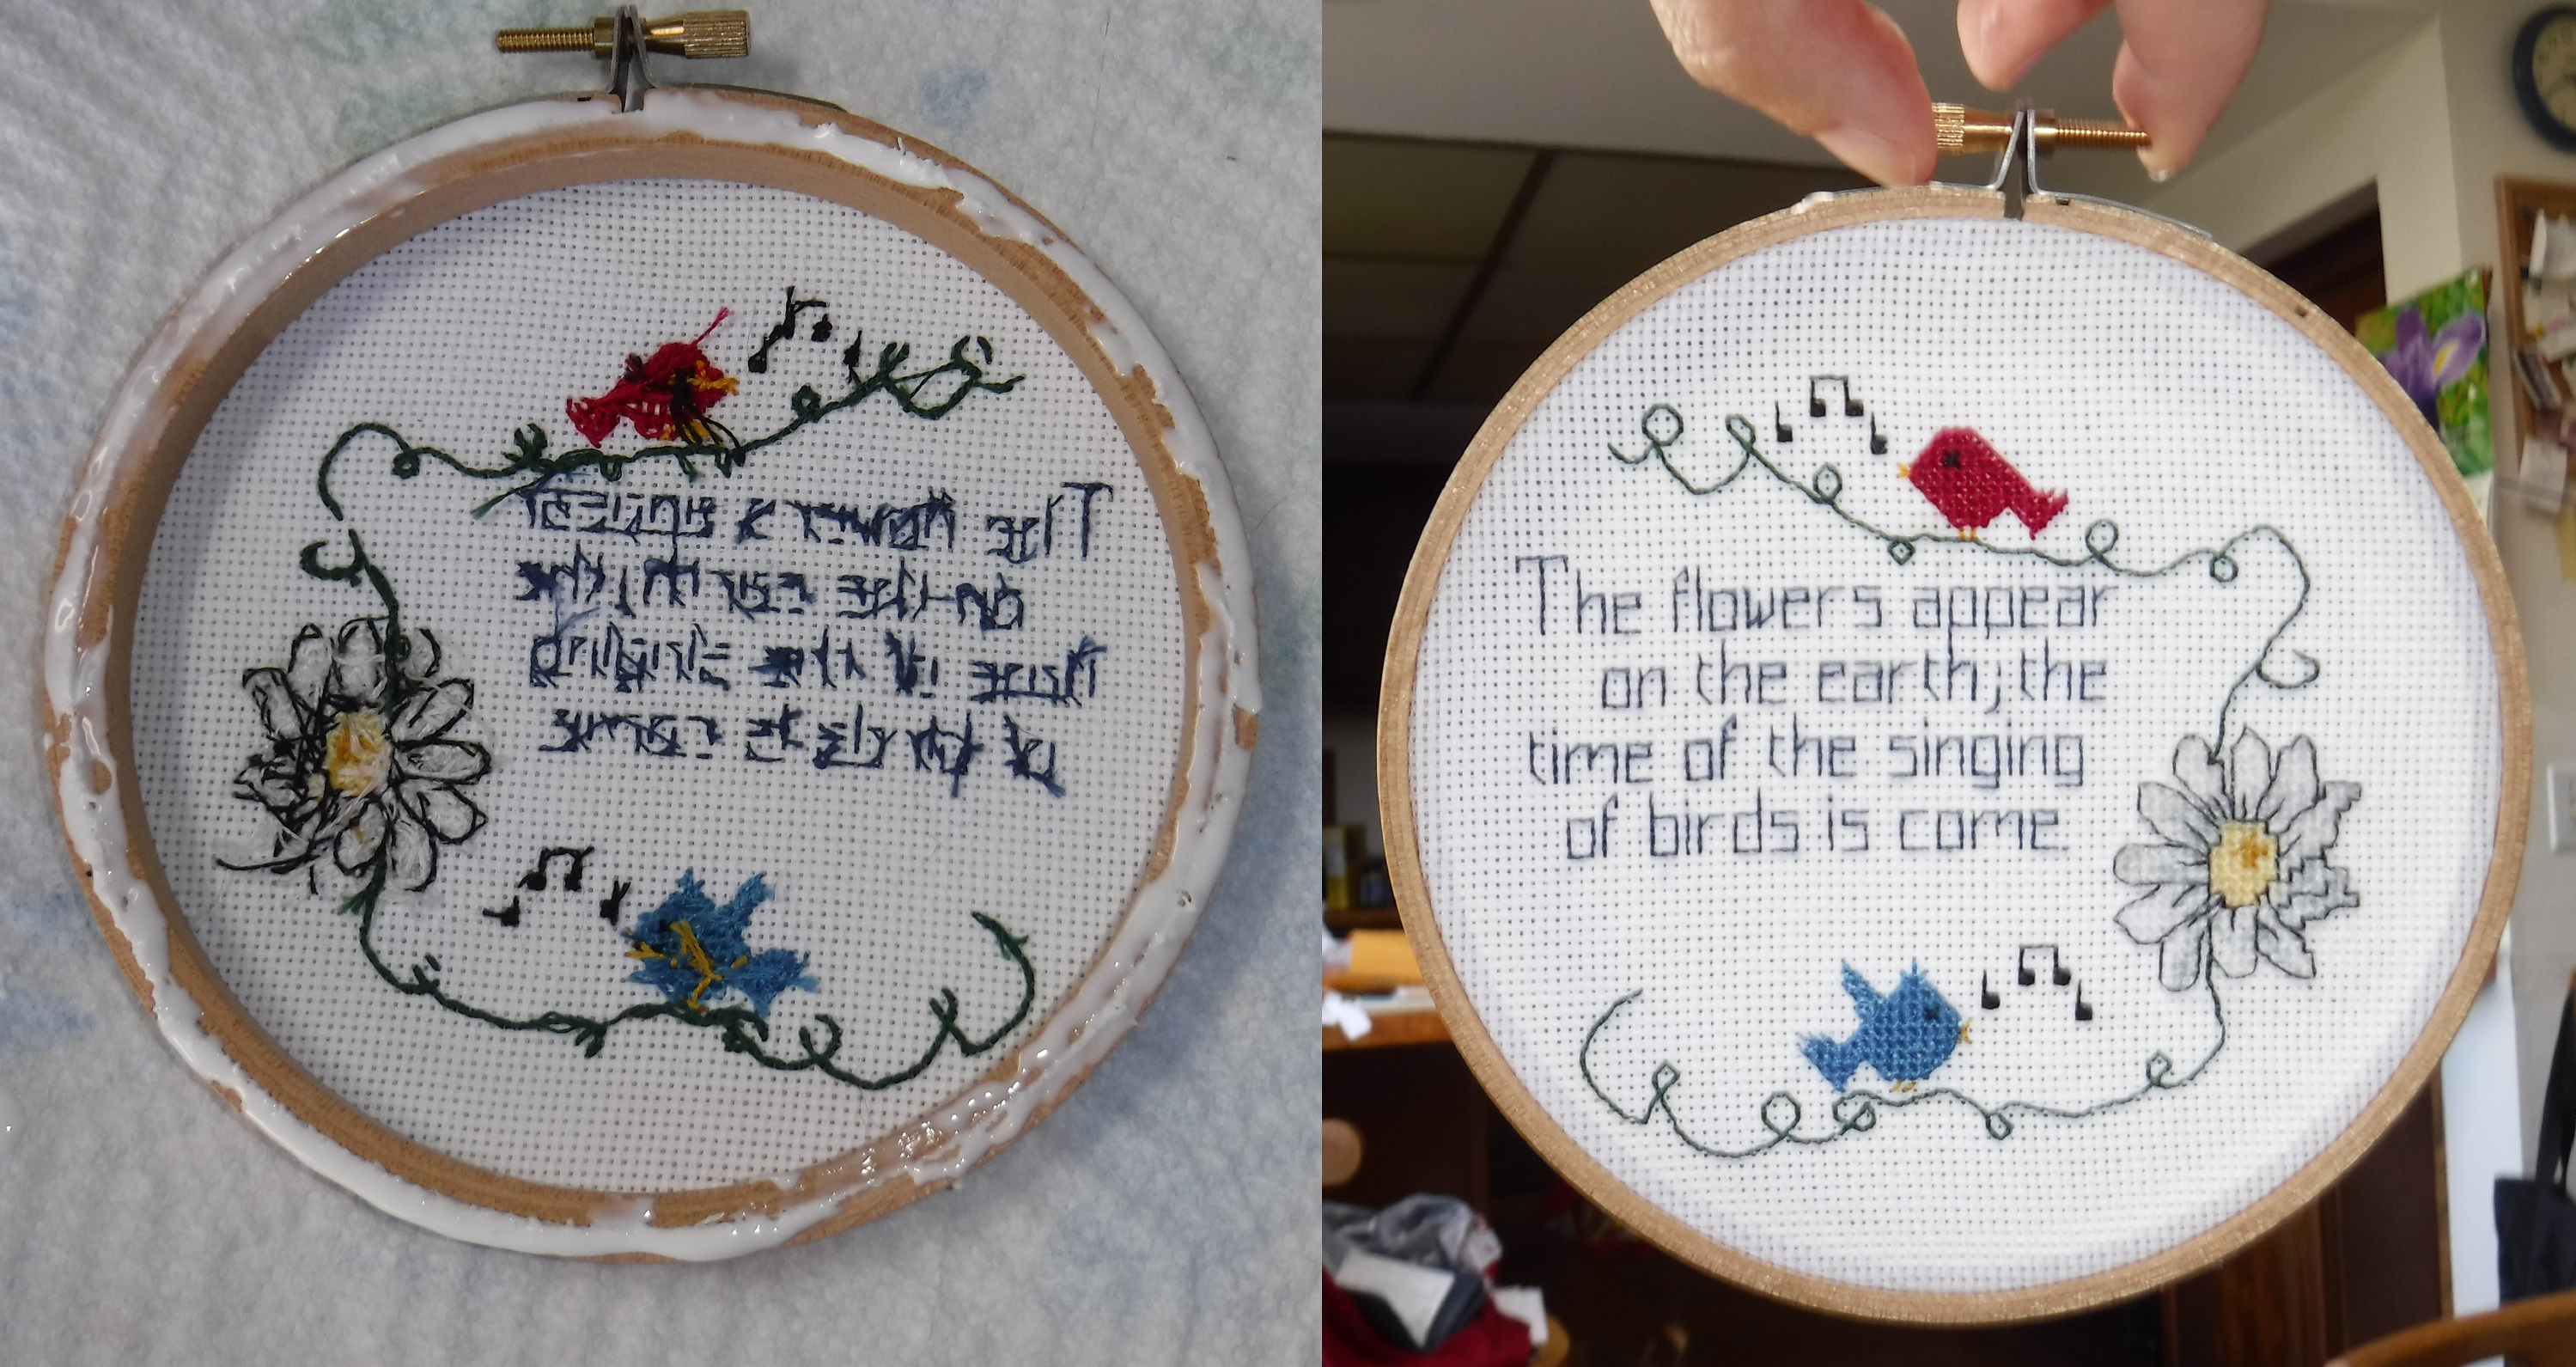 Photos I took of the back of the cross stitch with glue and the front